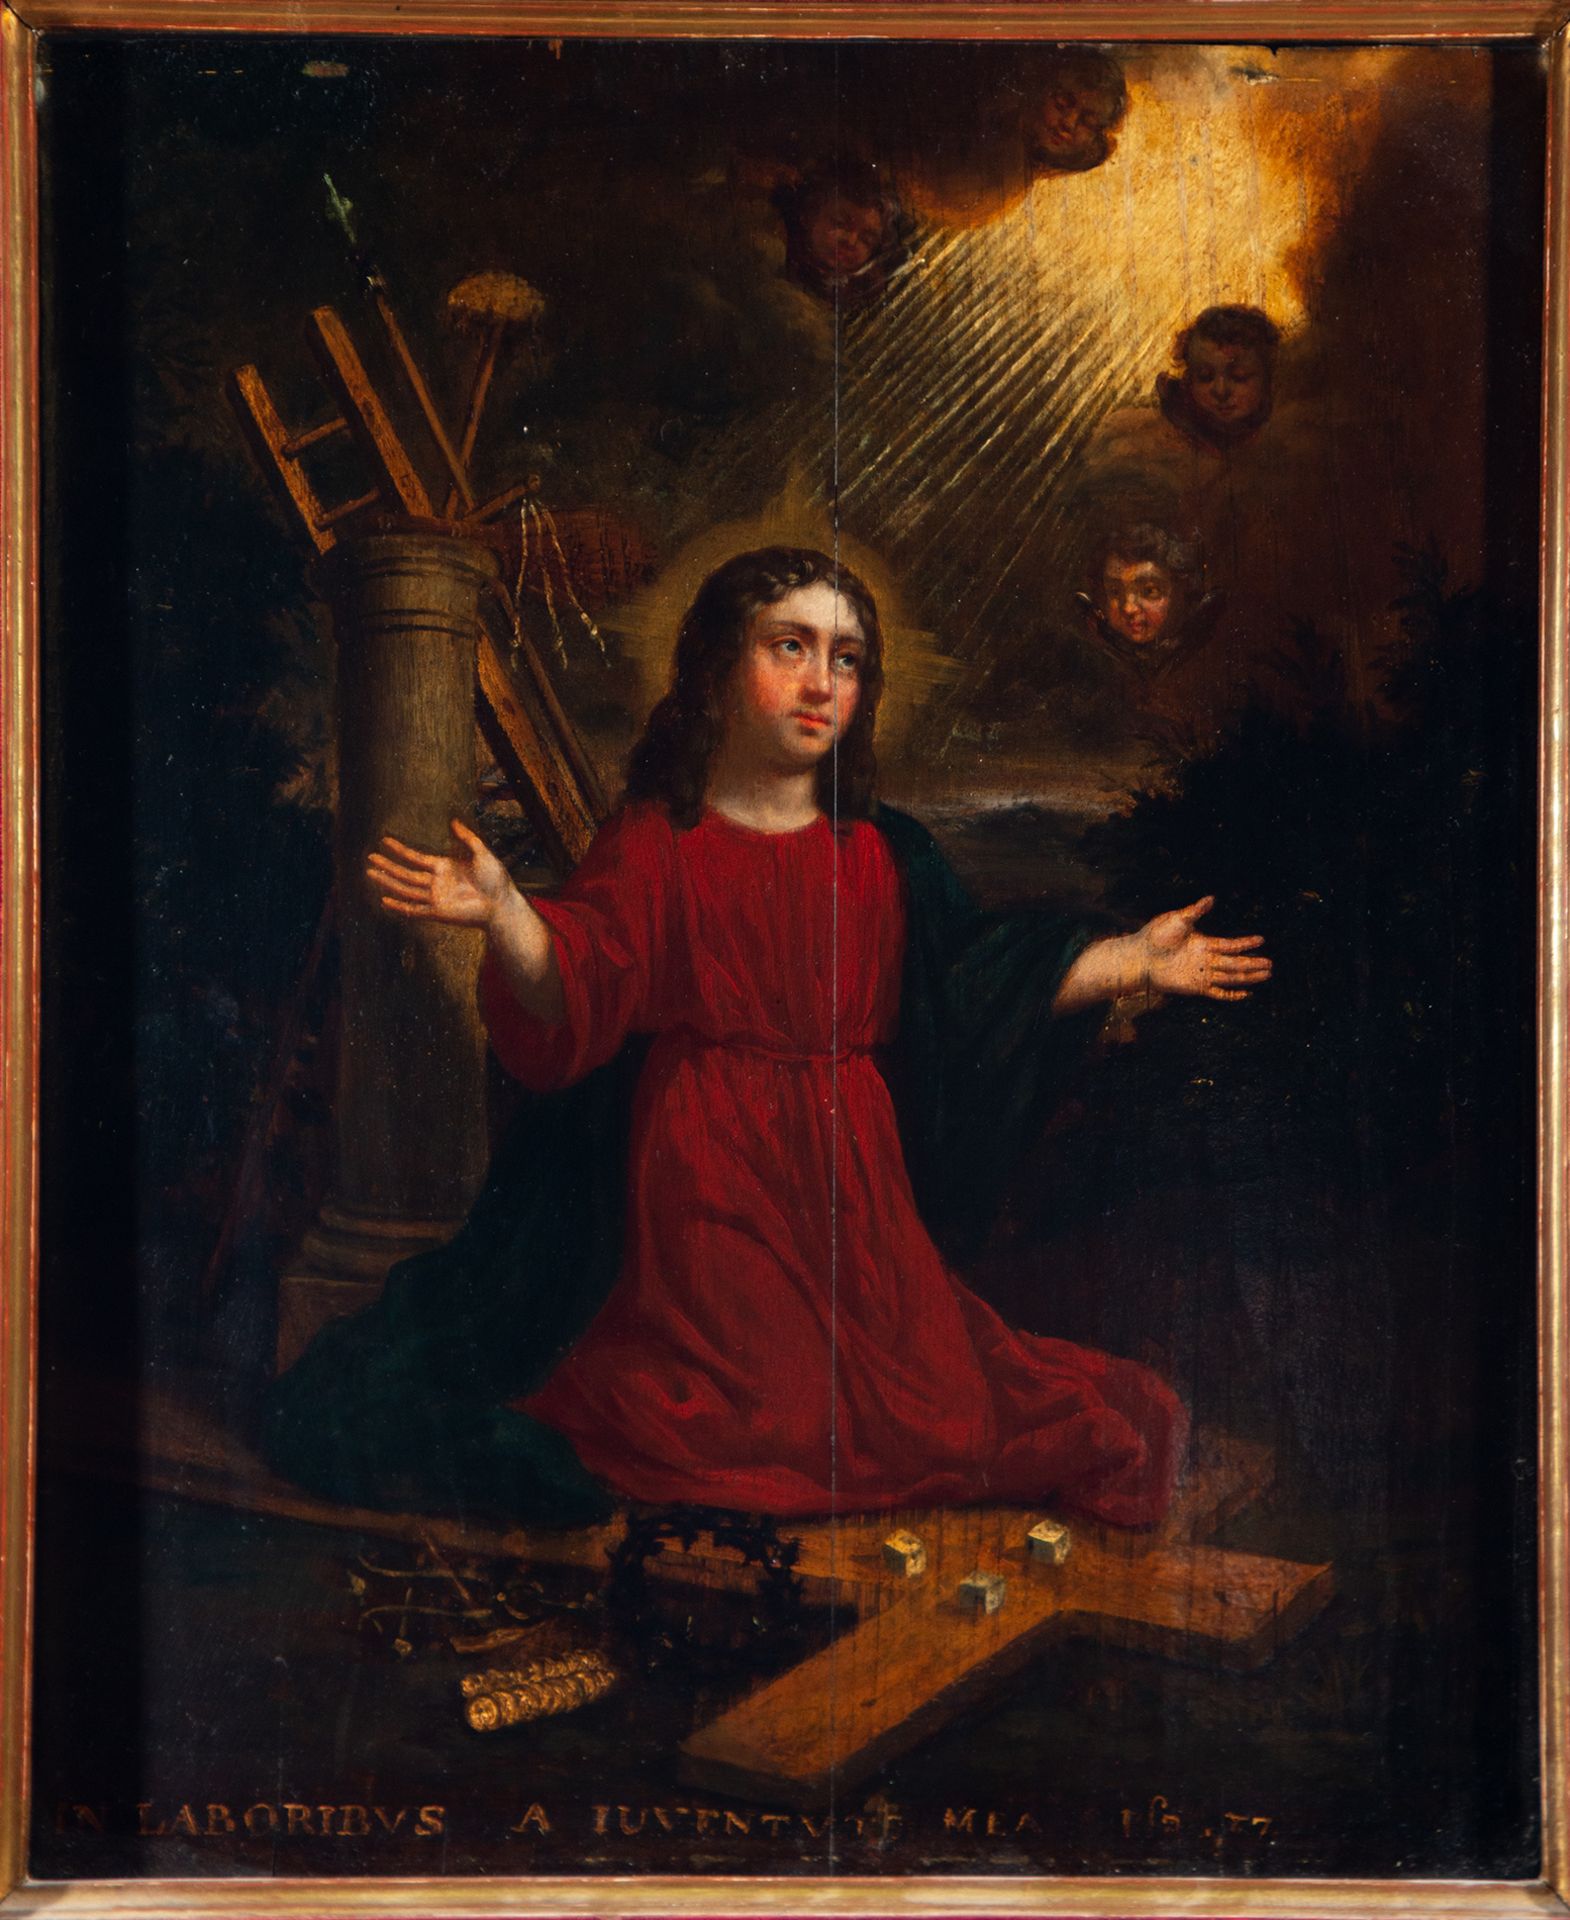 Enfant Jesus of the Passion, Italo-Flemish school from the 16th century - Image 2 of 8